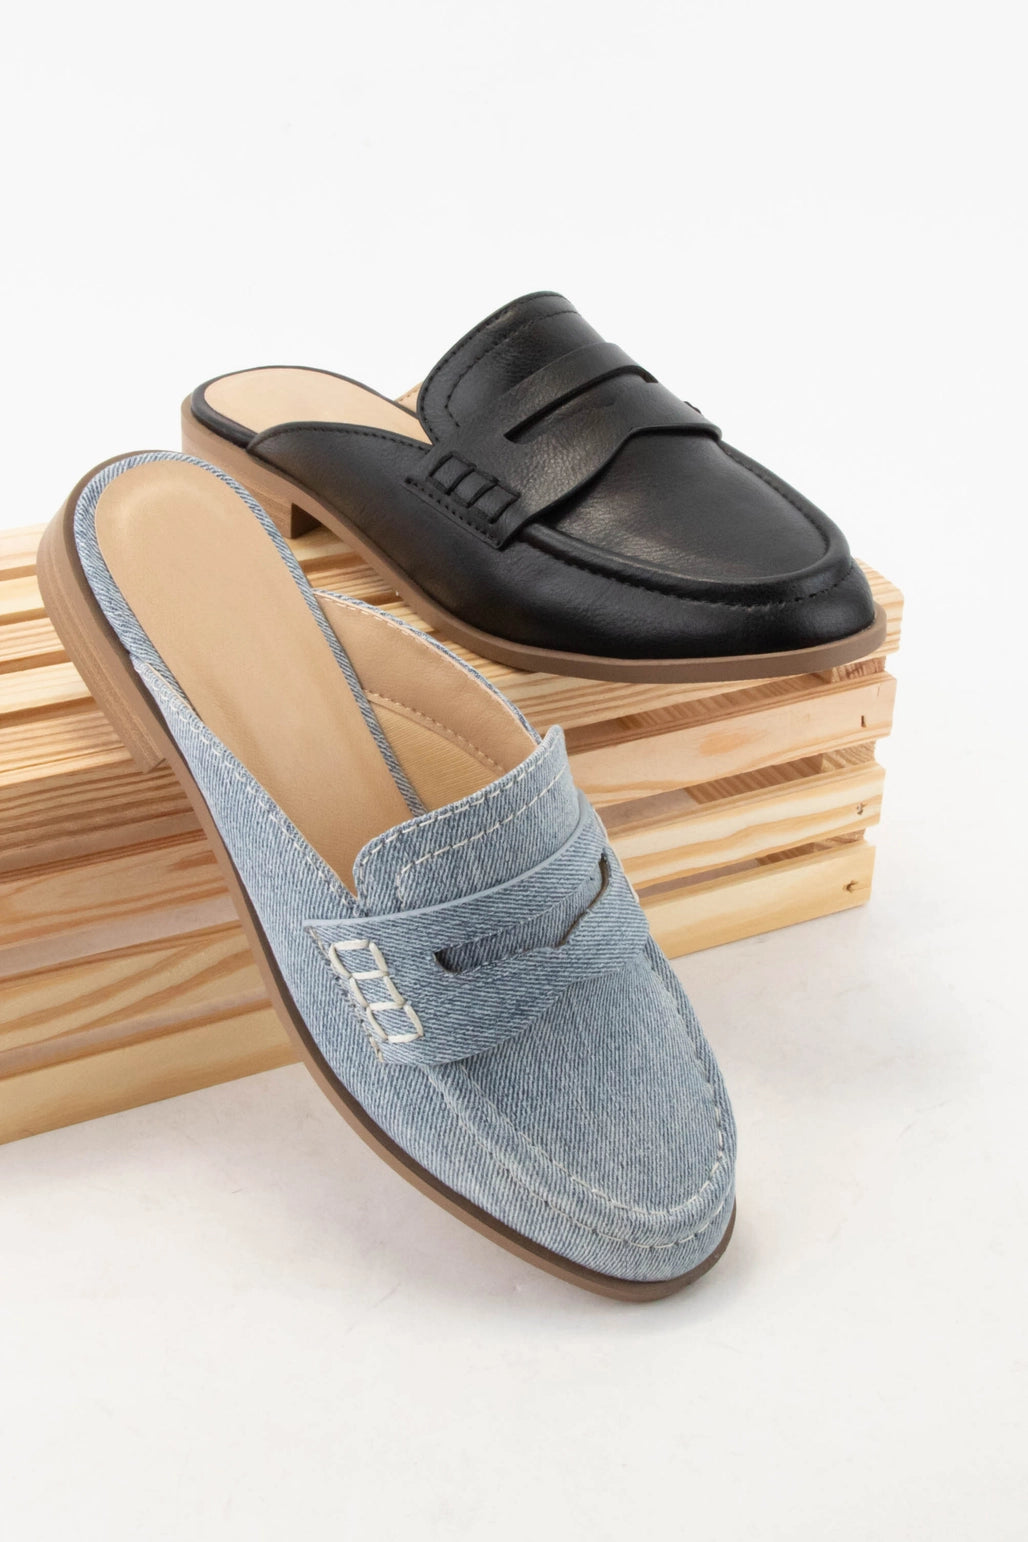 Perks Loafer Mule - KC Outfitter